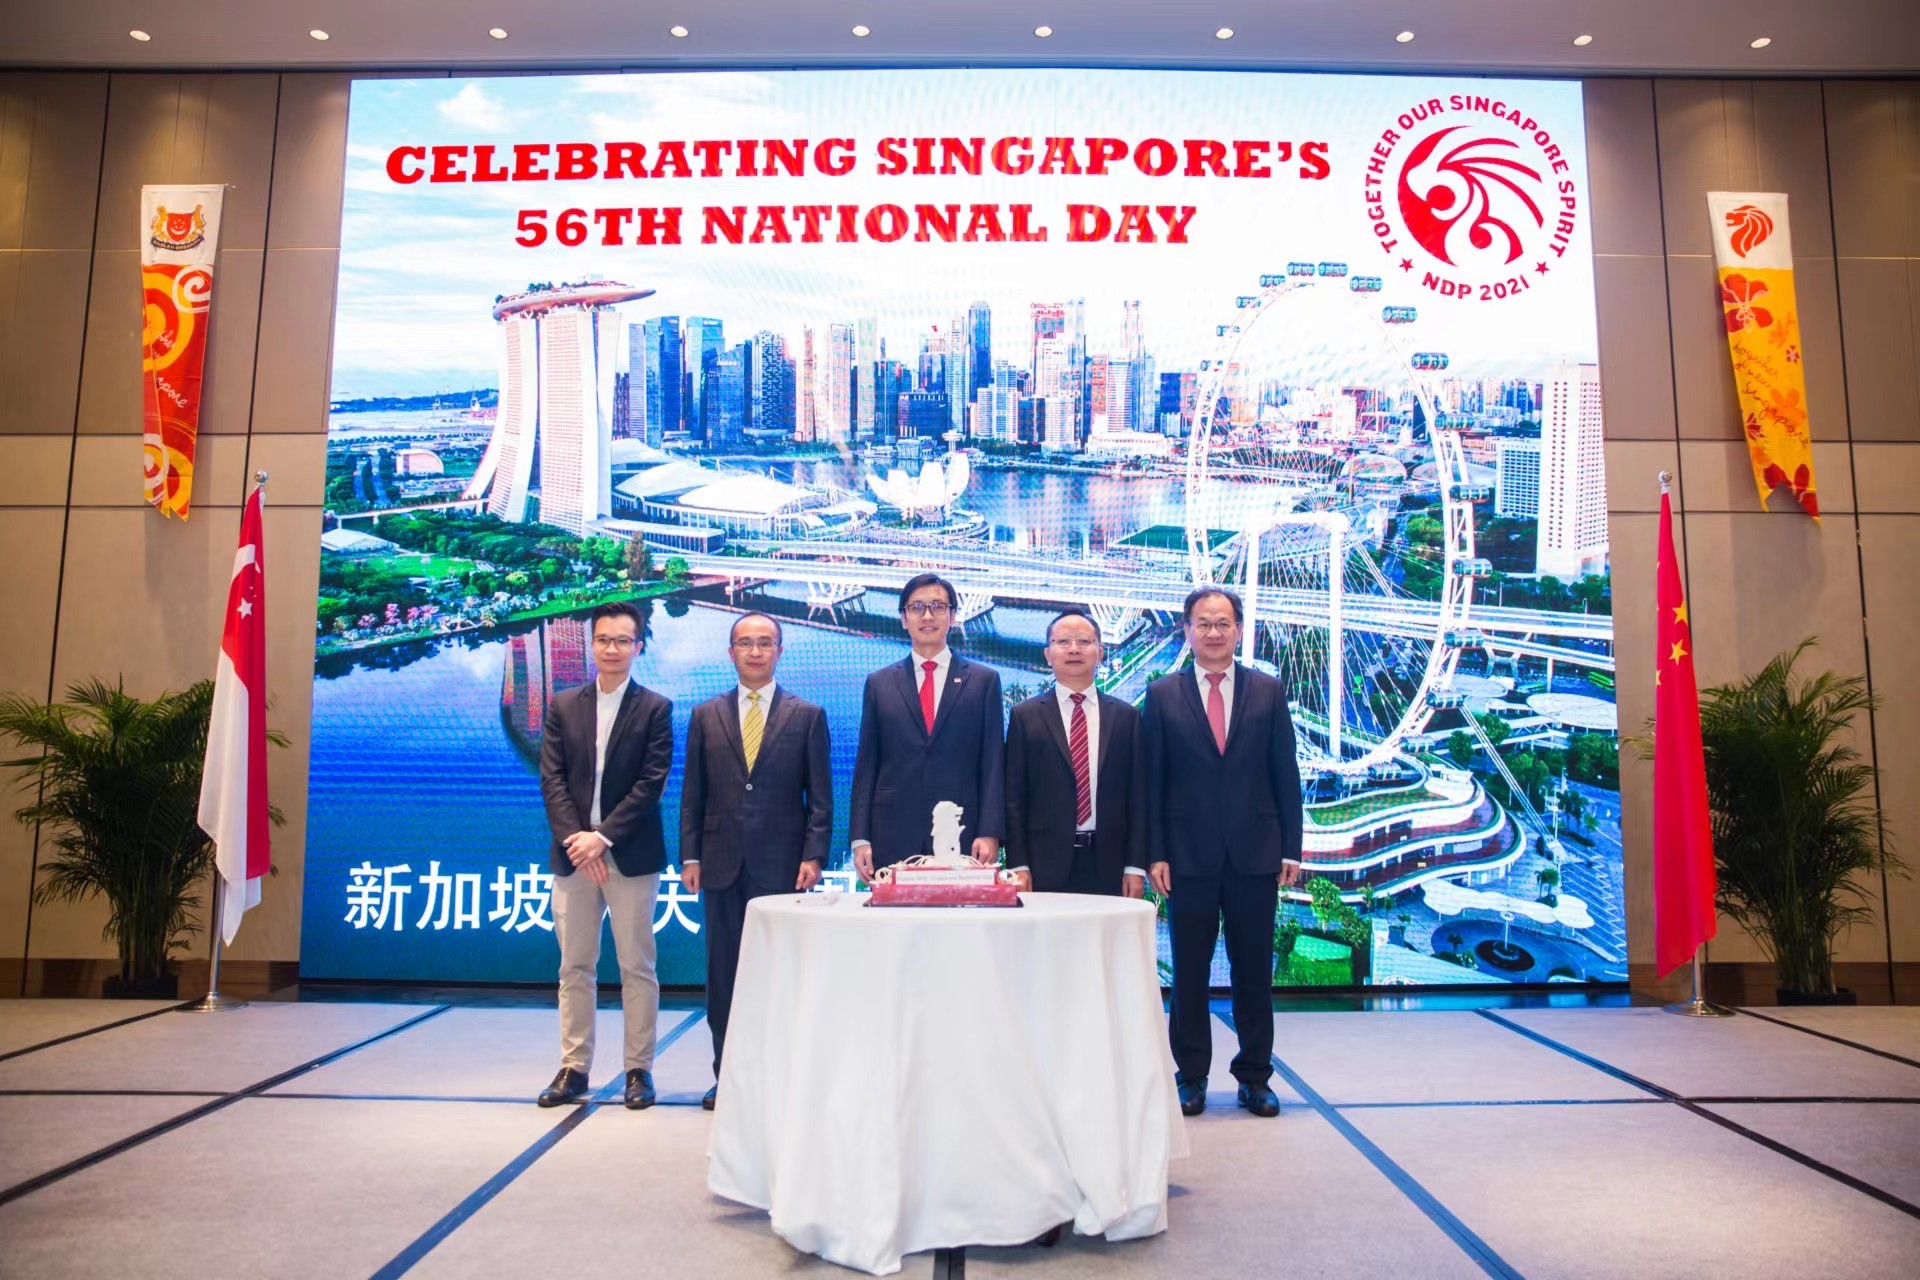 56th National Day Reception